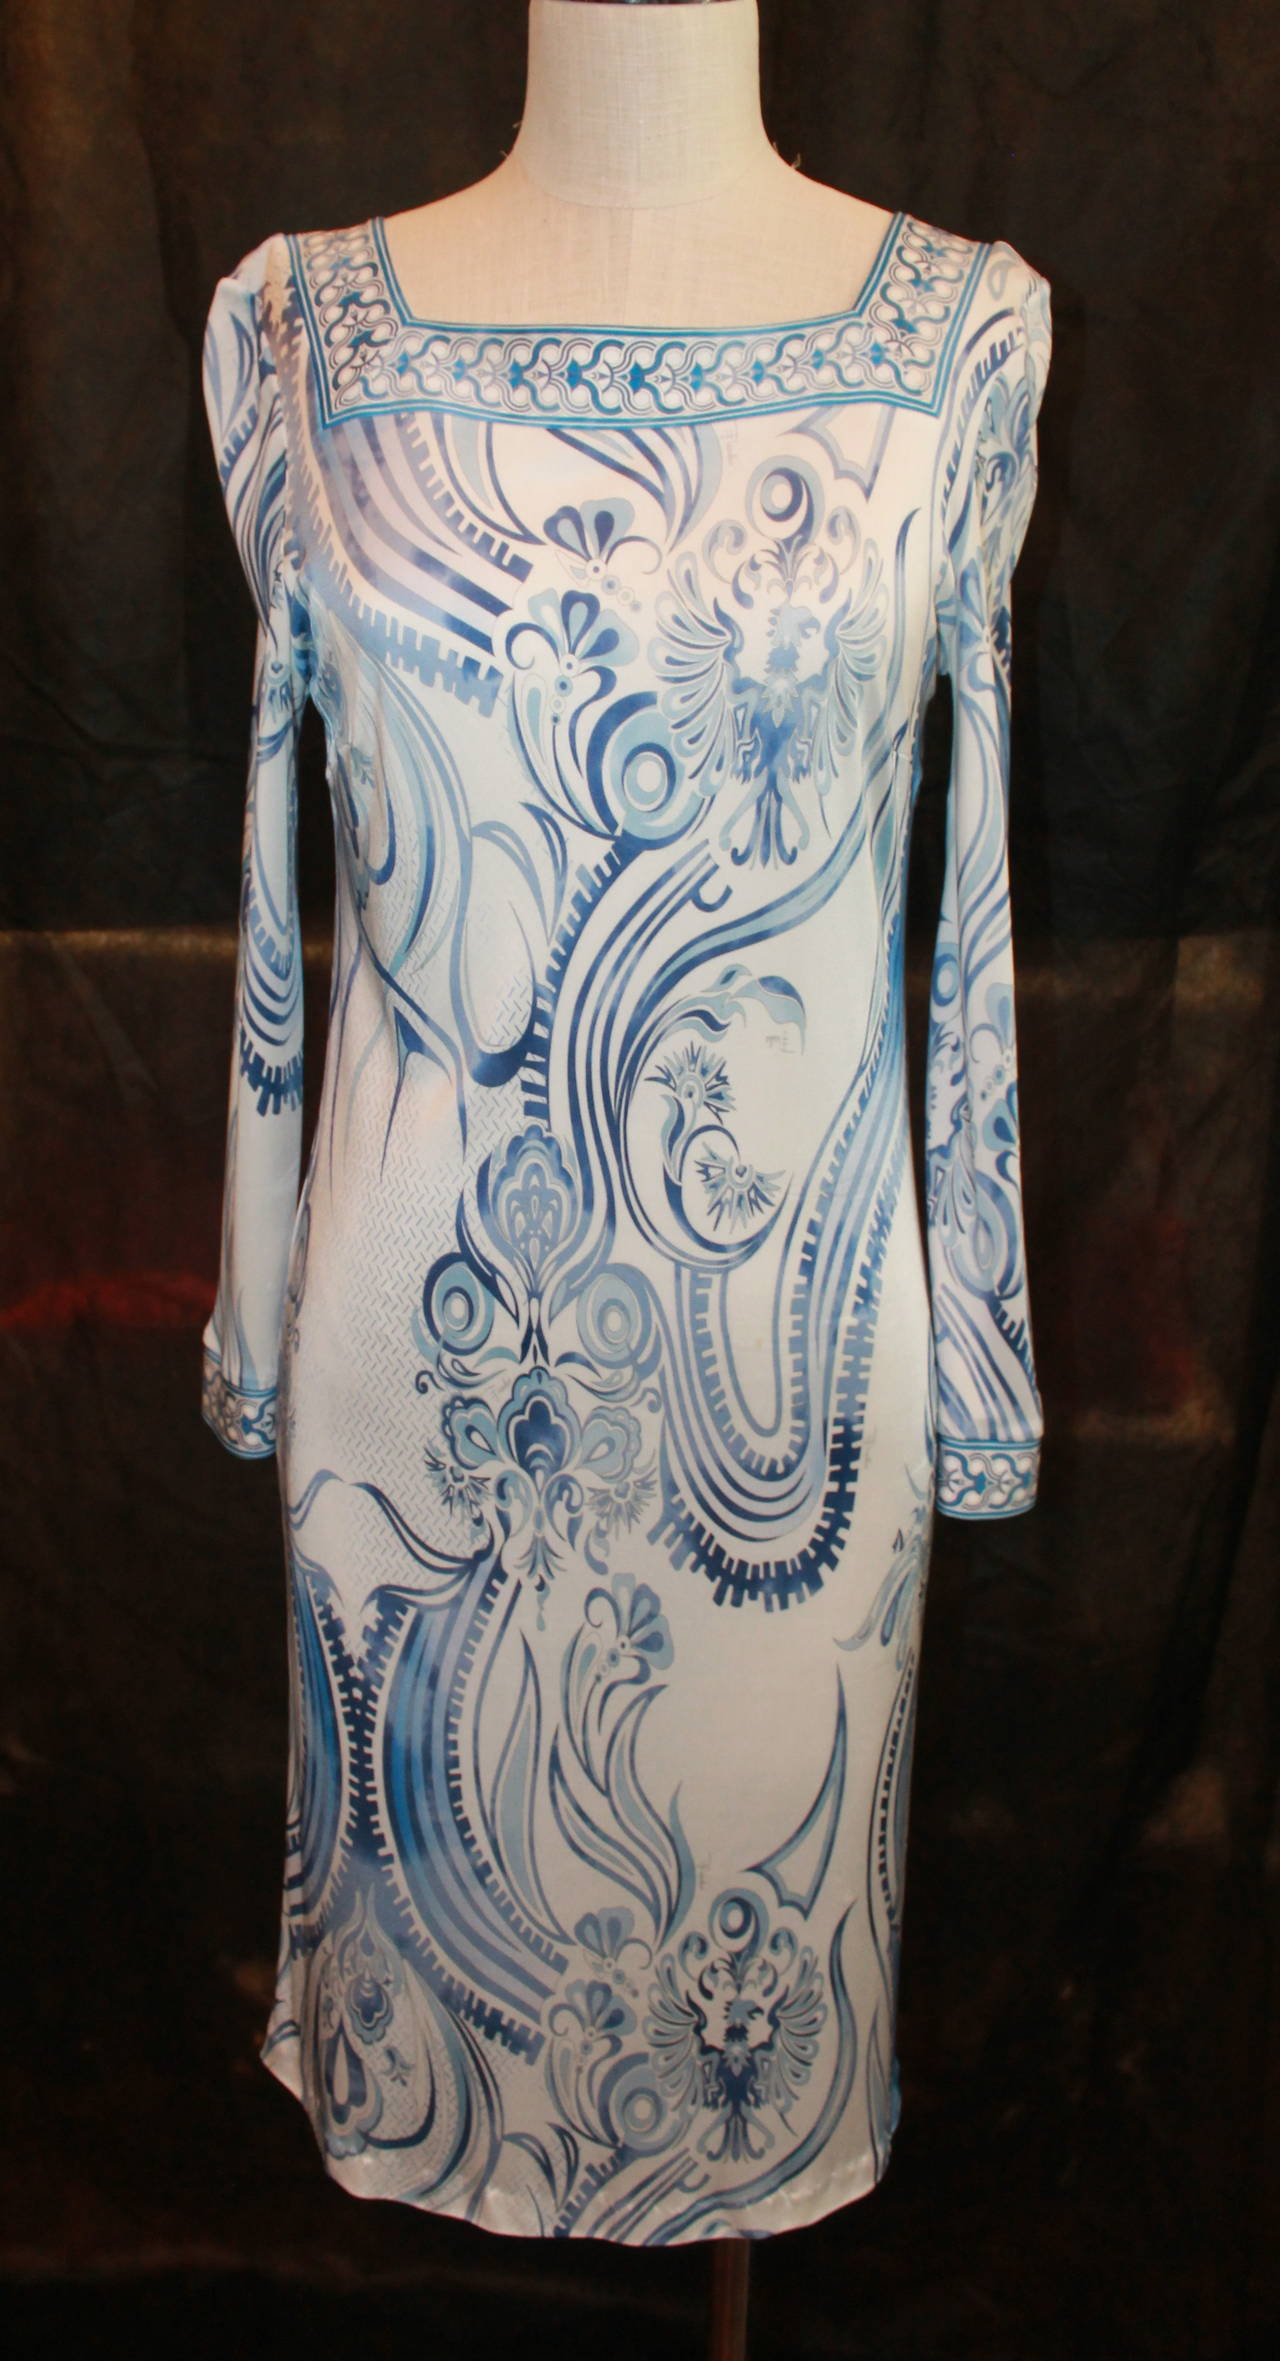 Emilio Pucci White & Blue Printed Long-Sleeve Jersey Dress - 46. This dress is in good condition and only has 1 small stain on the front pictured on image 5. 

Measurements:
Bust/Waist/Hips- 34